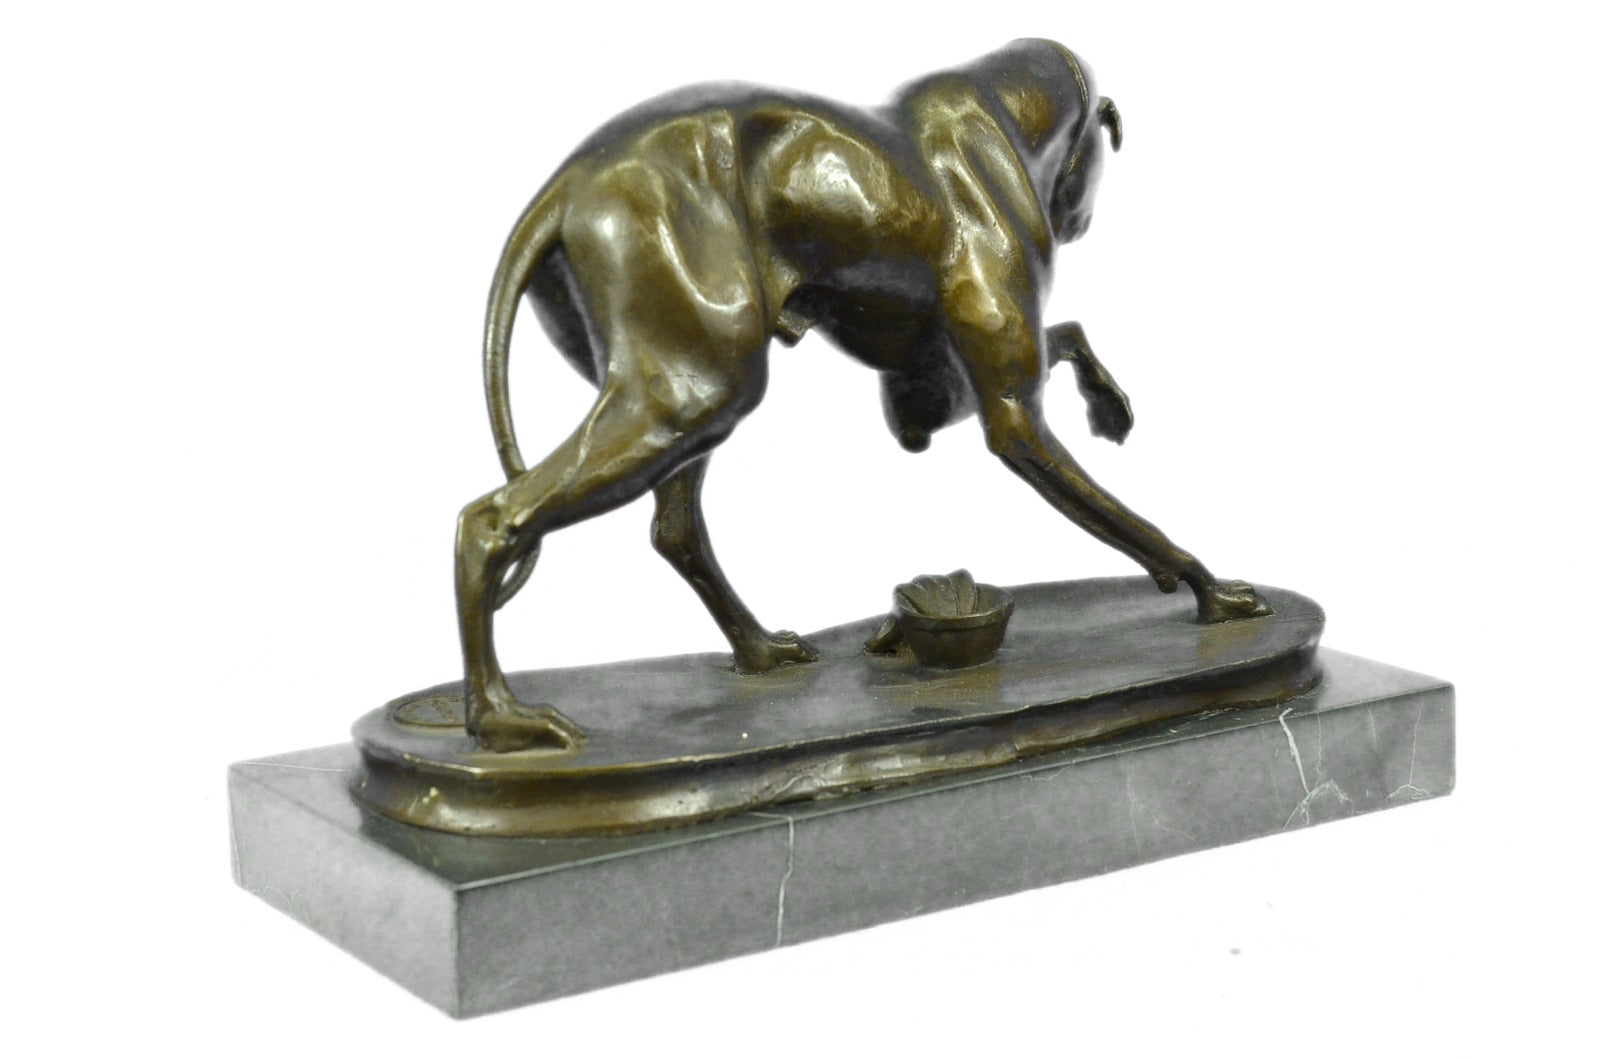 Handcrafted bronze sculpture SALE Base Marble On Hunting Animal Dogs Dog